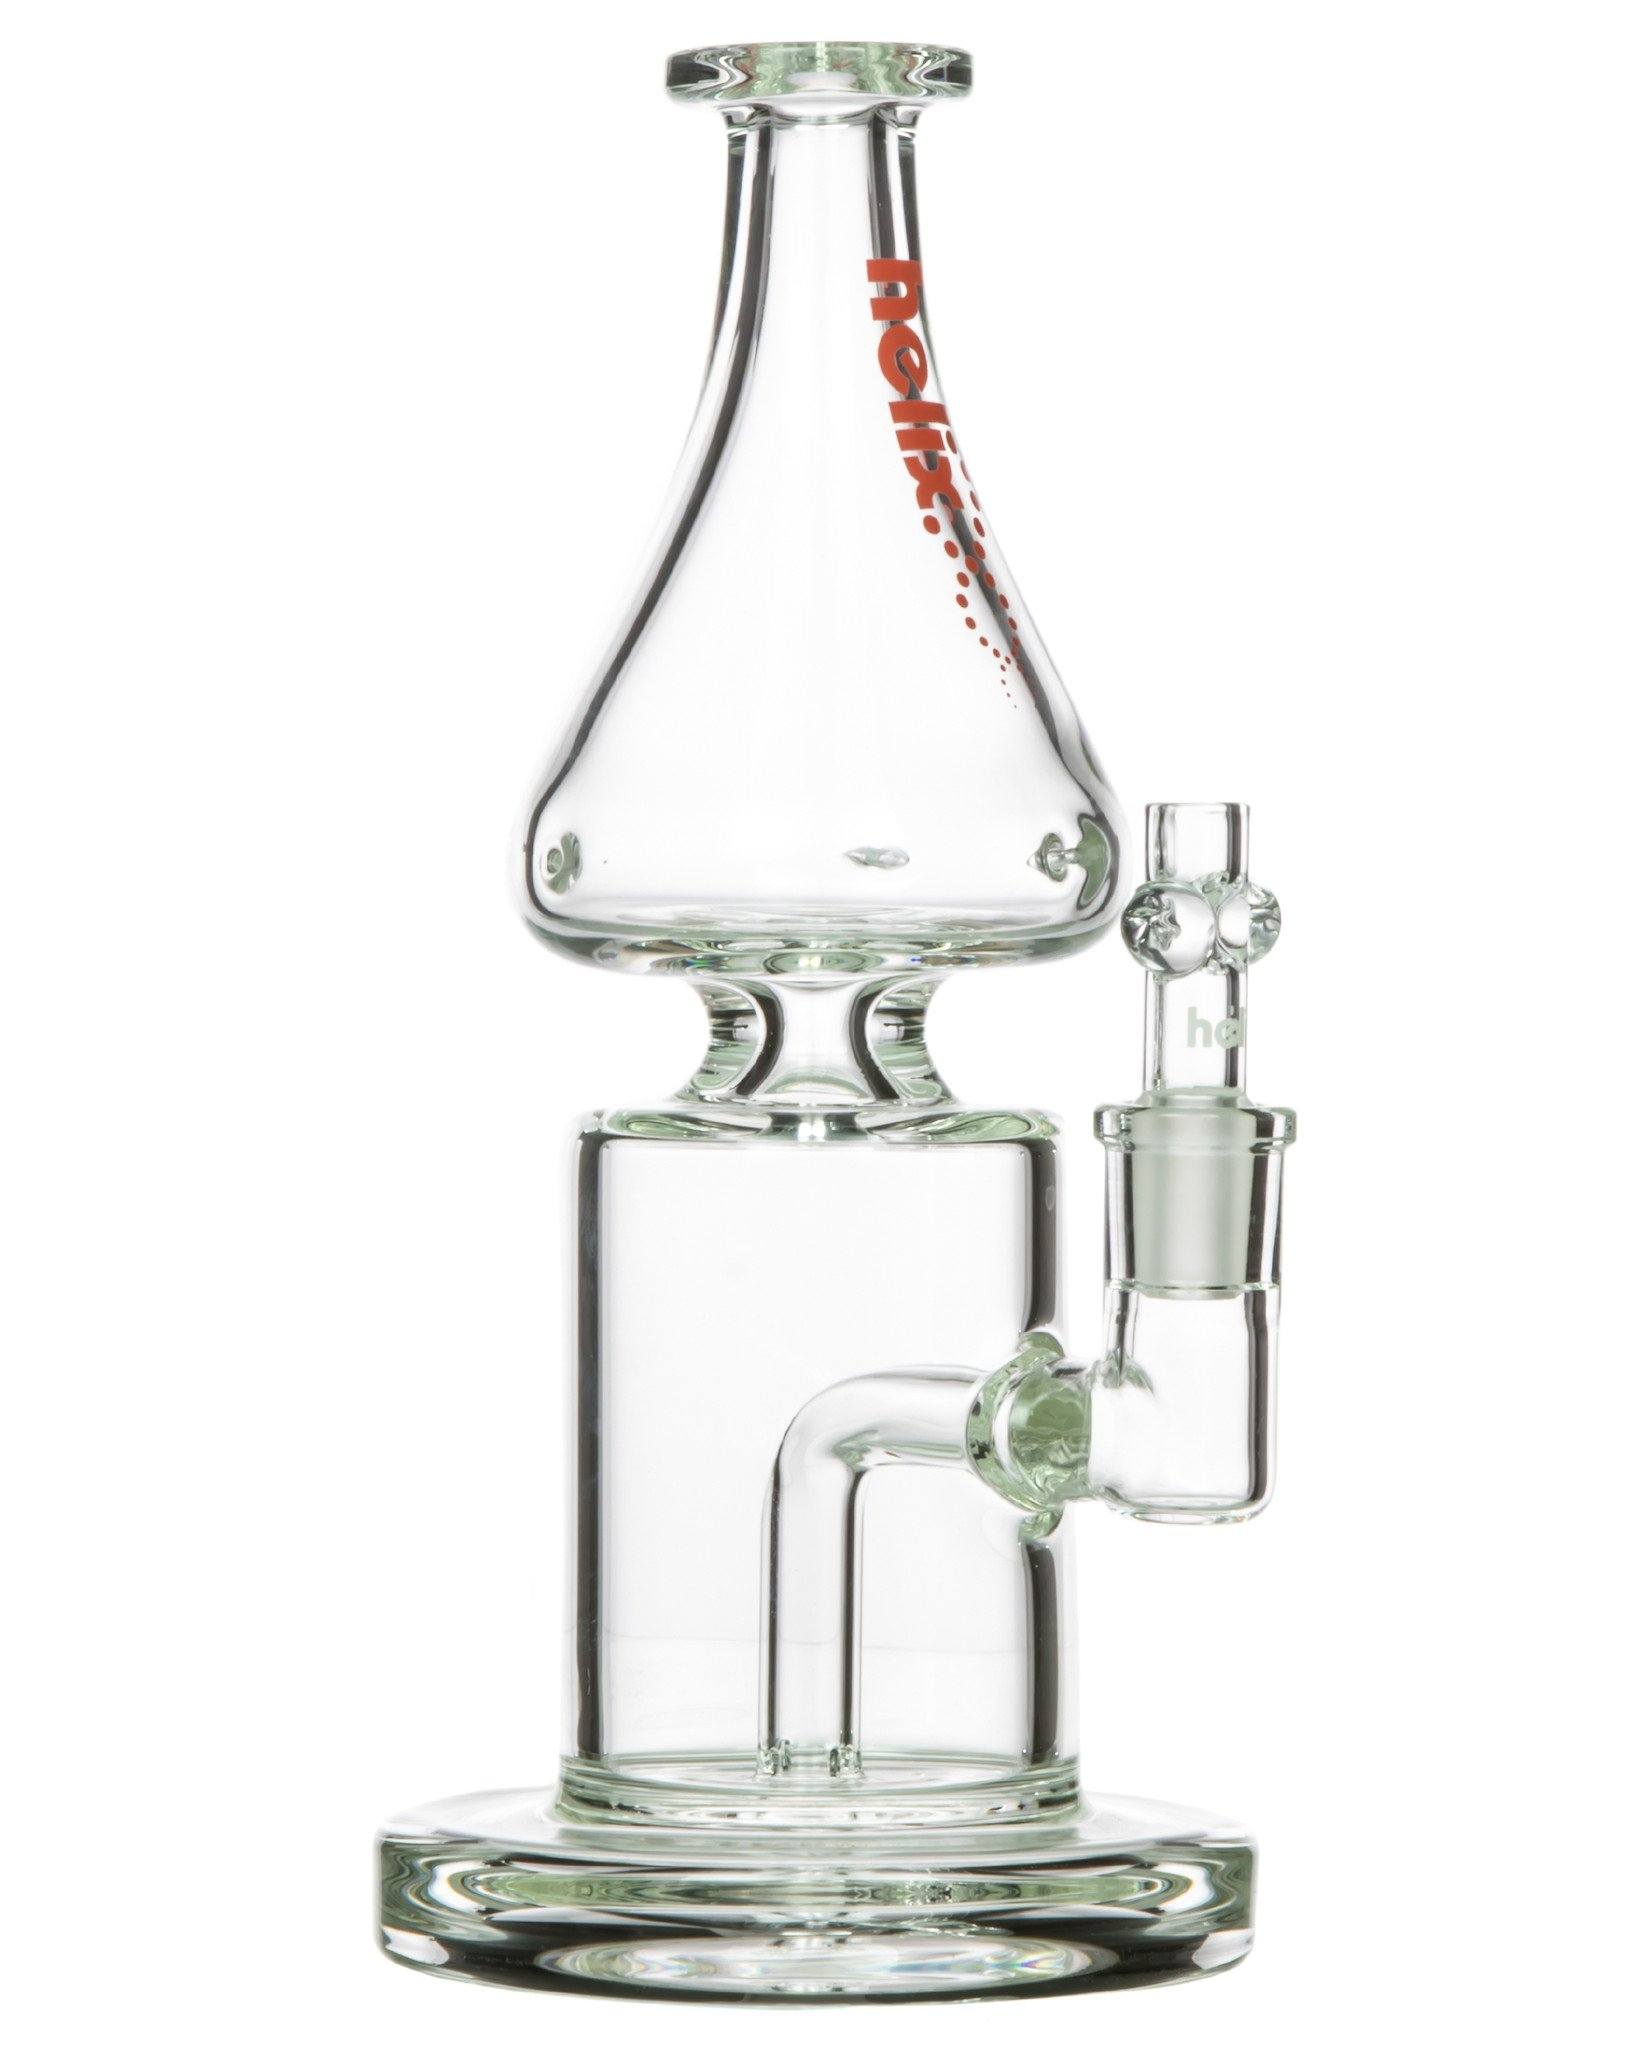 helix flare bong by Grav Labs at Flower Power Packages